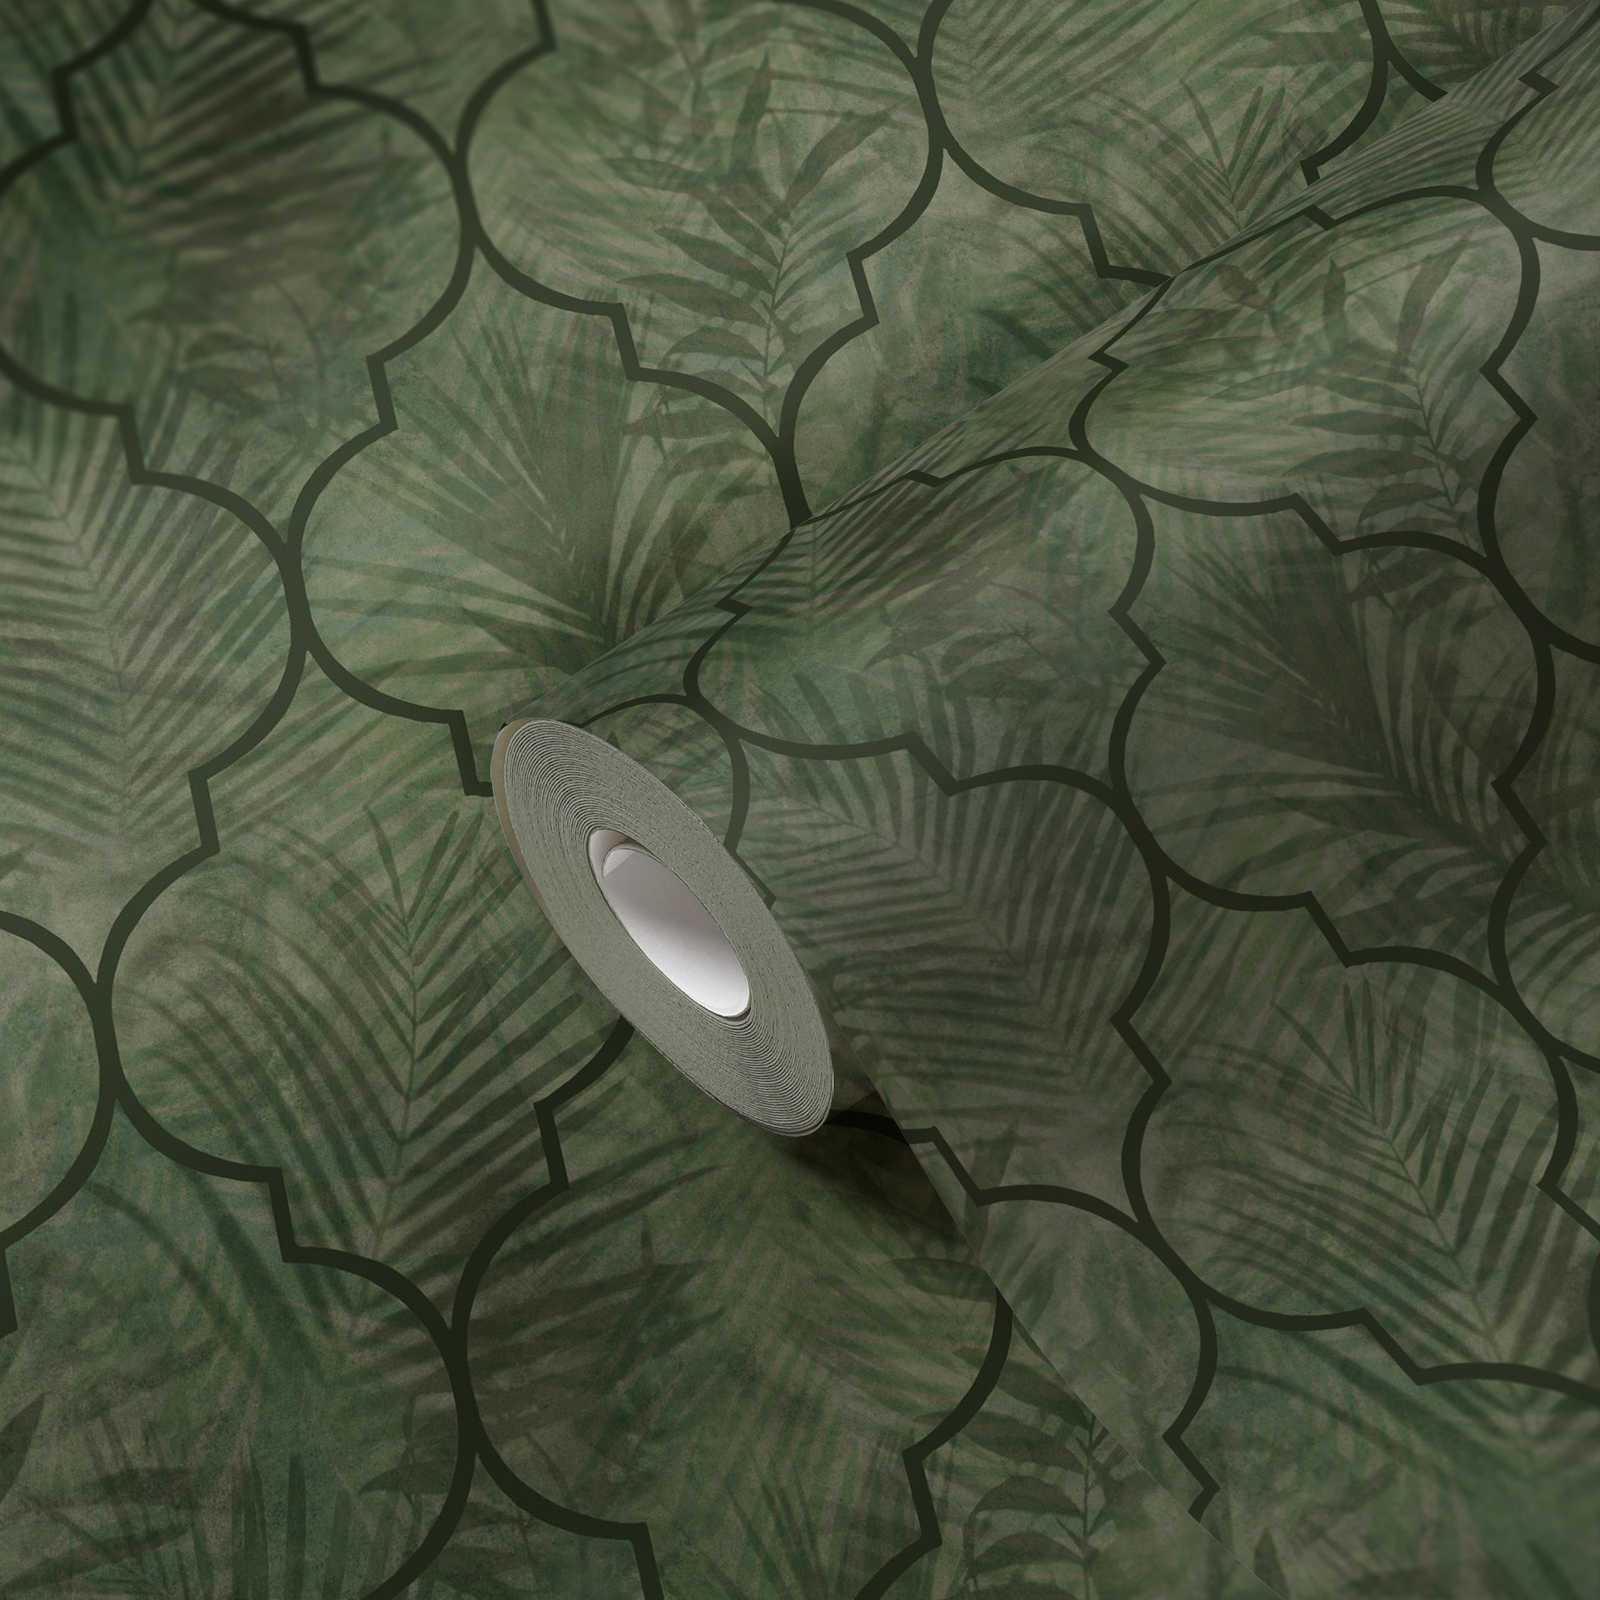             Non-woven wallpaper with leaf pattern on tile look - green
        